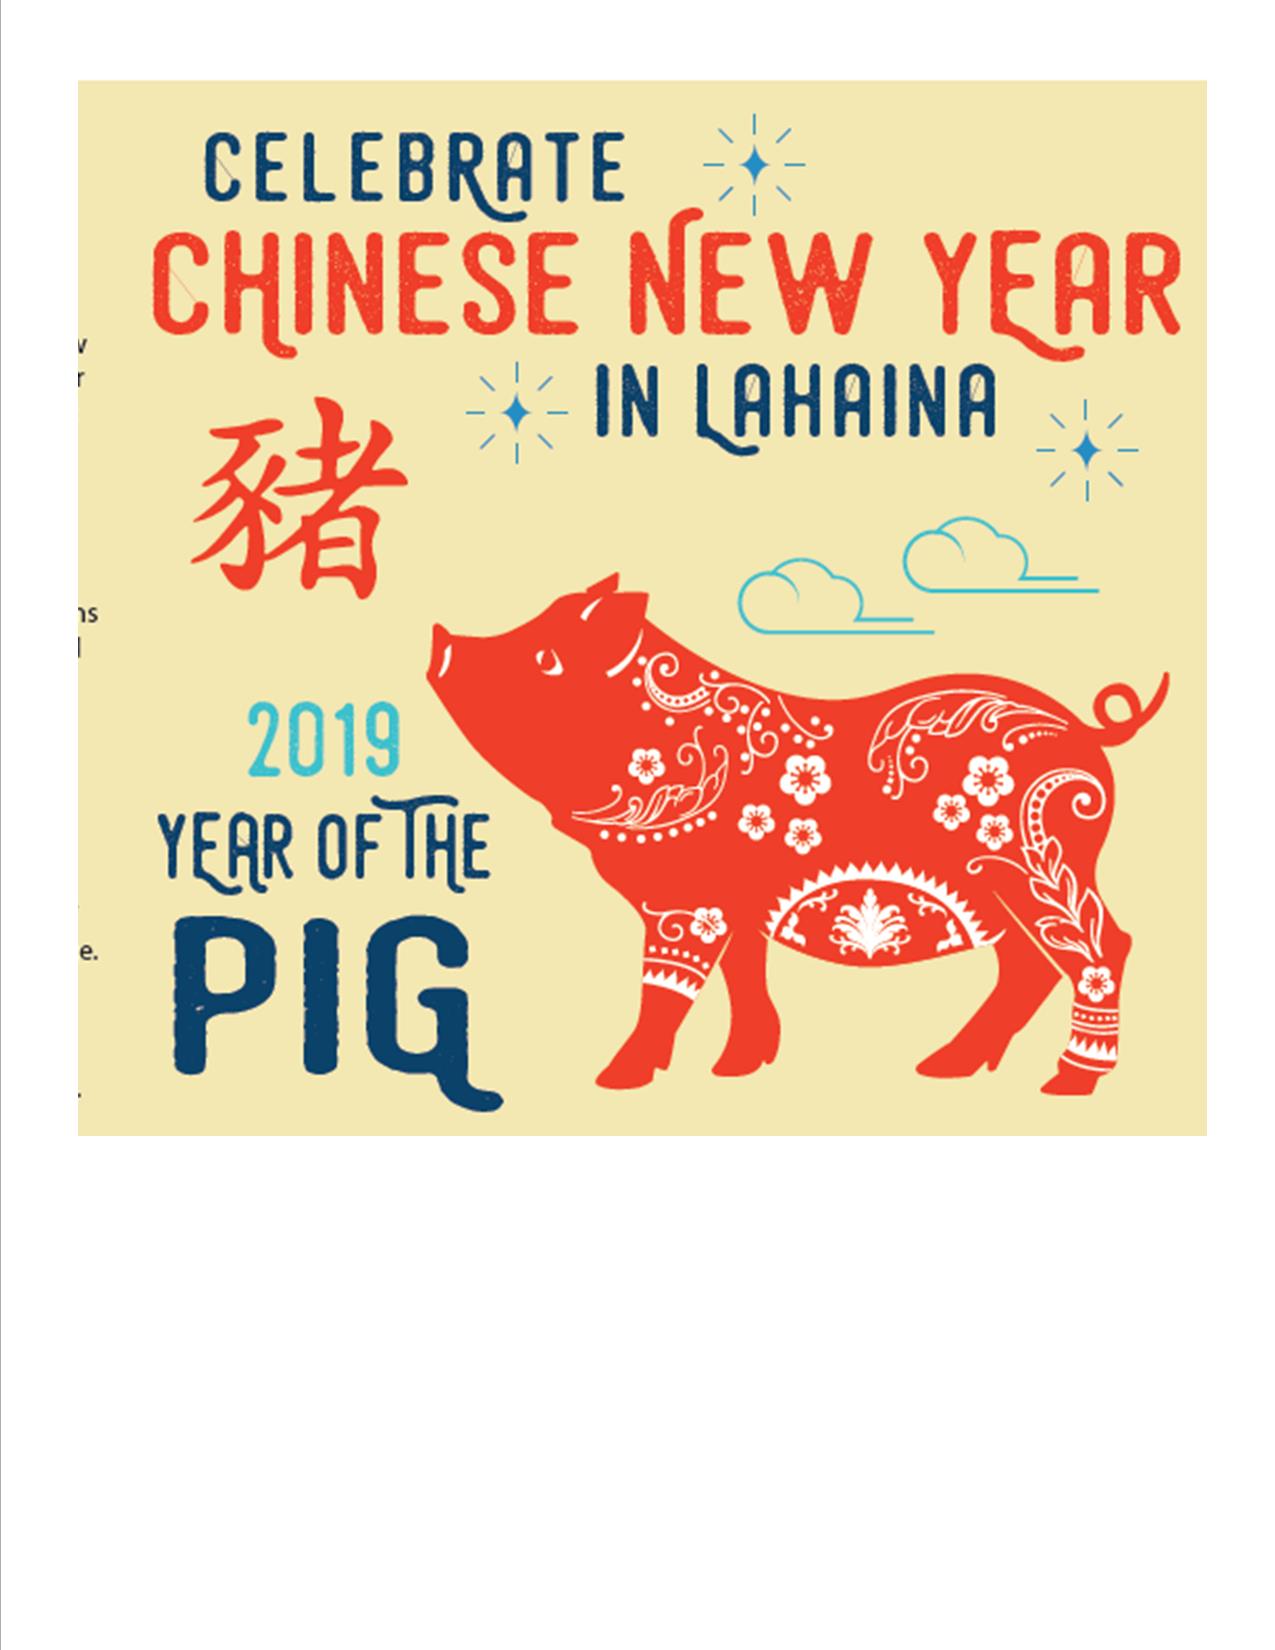 Celebrate Chinese New Years in Lahaina design including a pig with decorative design on it